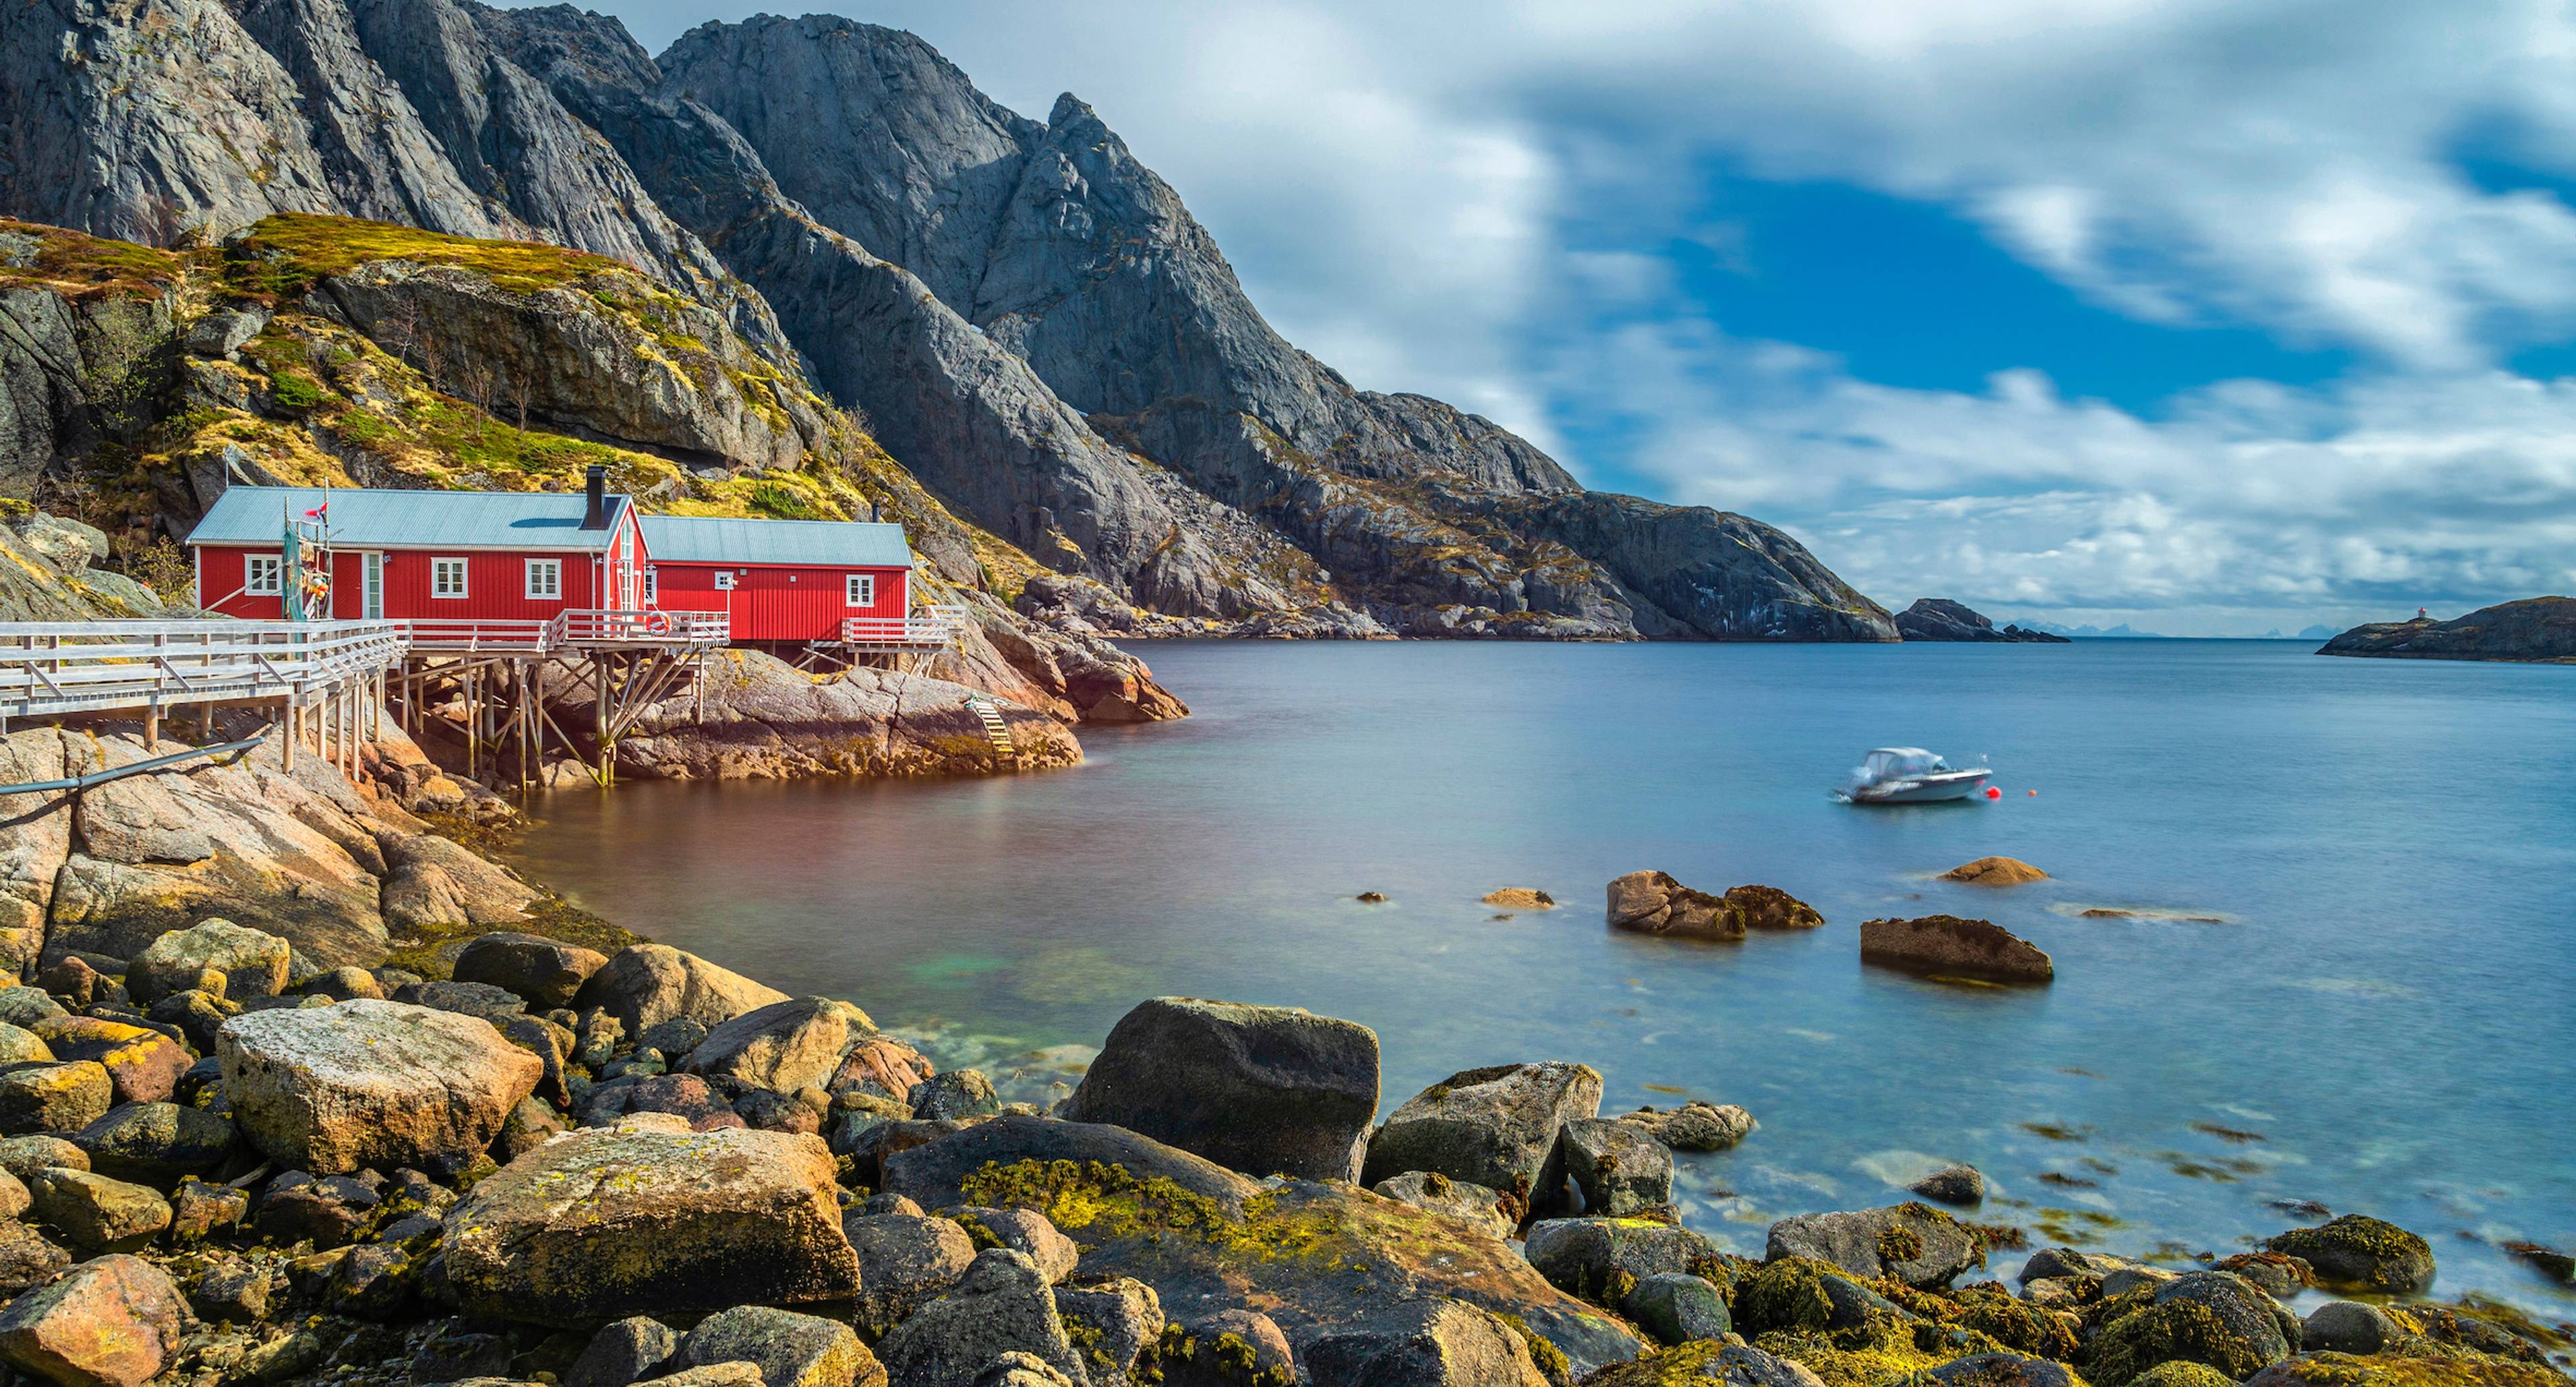 The Picture-Postcard Fishing Villages of Reine, Nusfjord, and Hamnøy